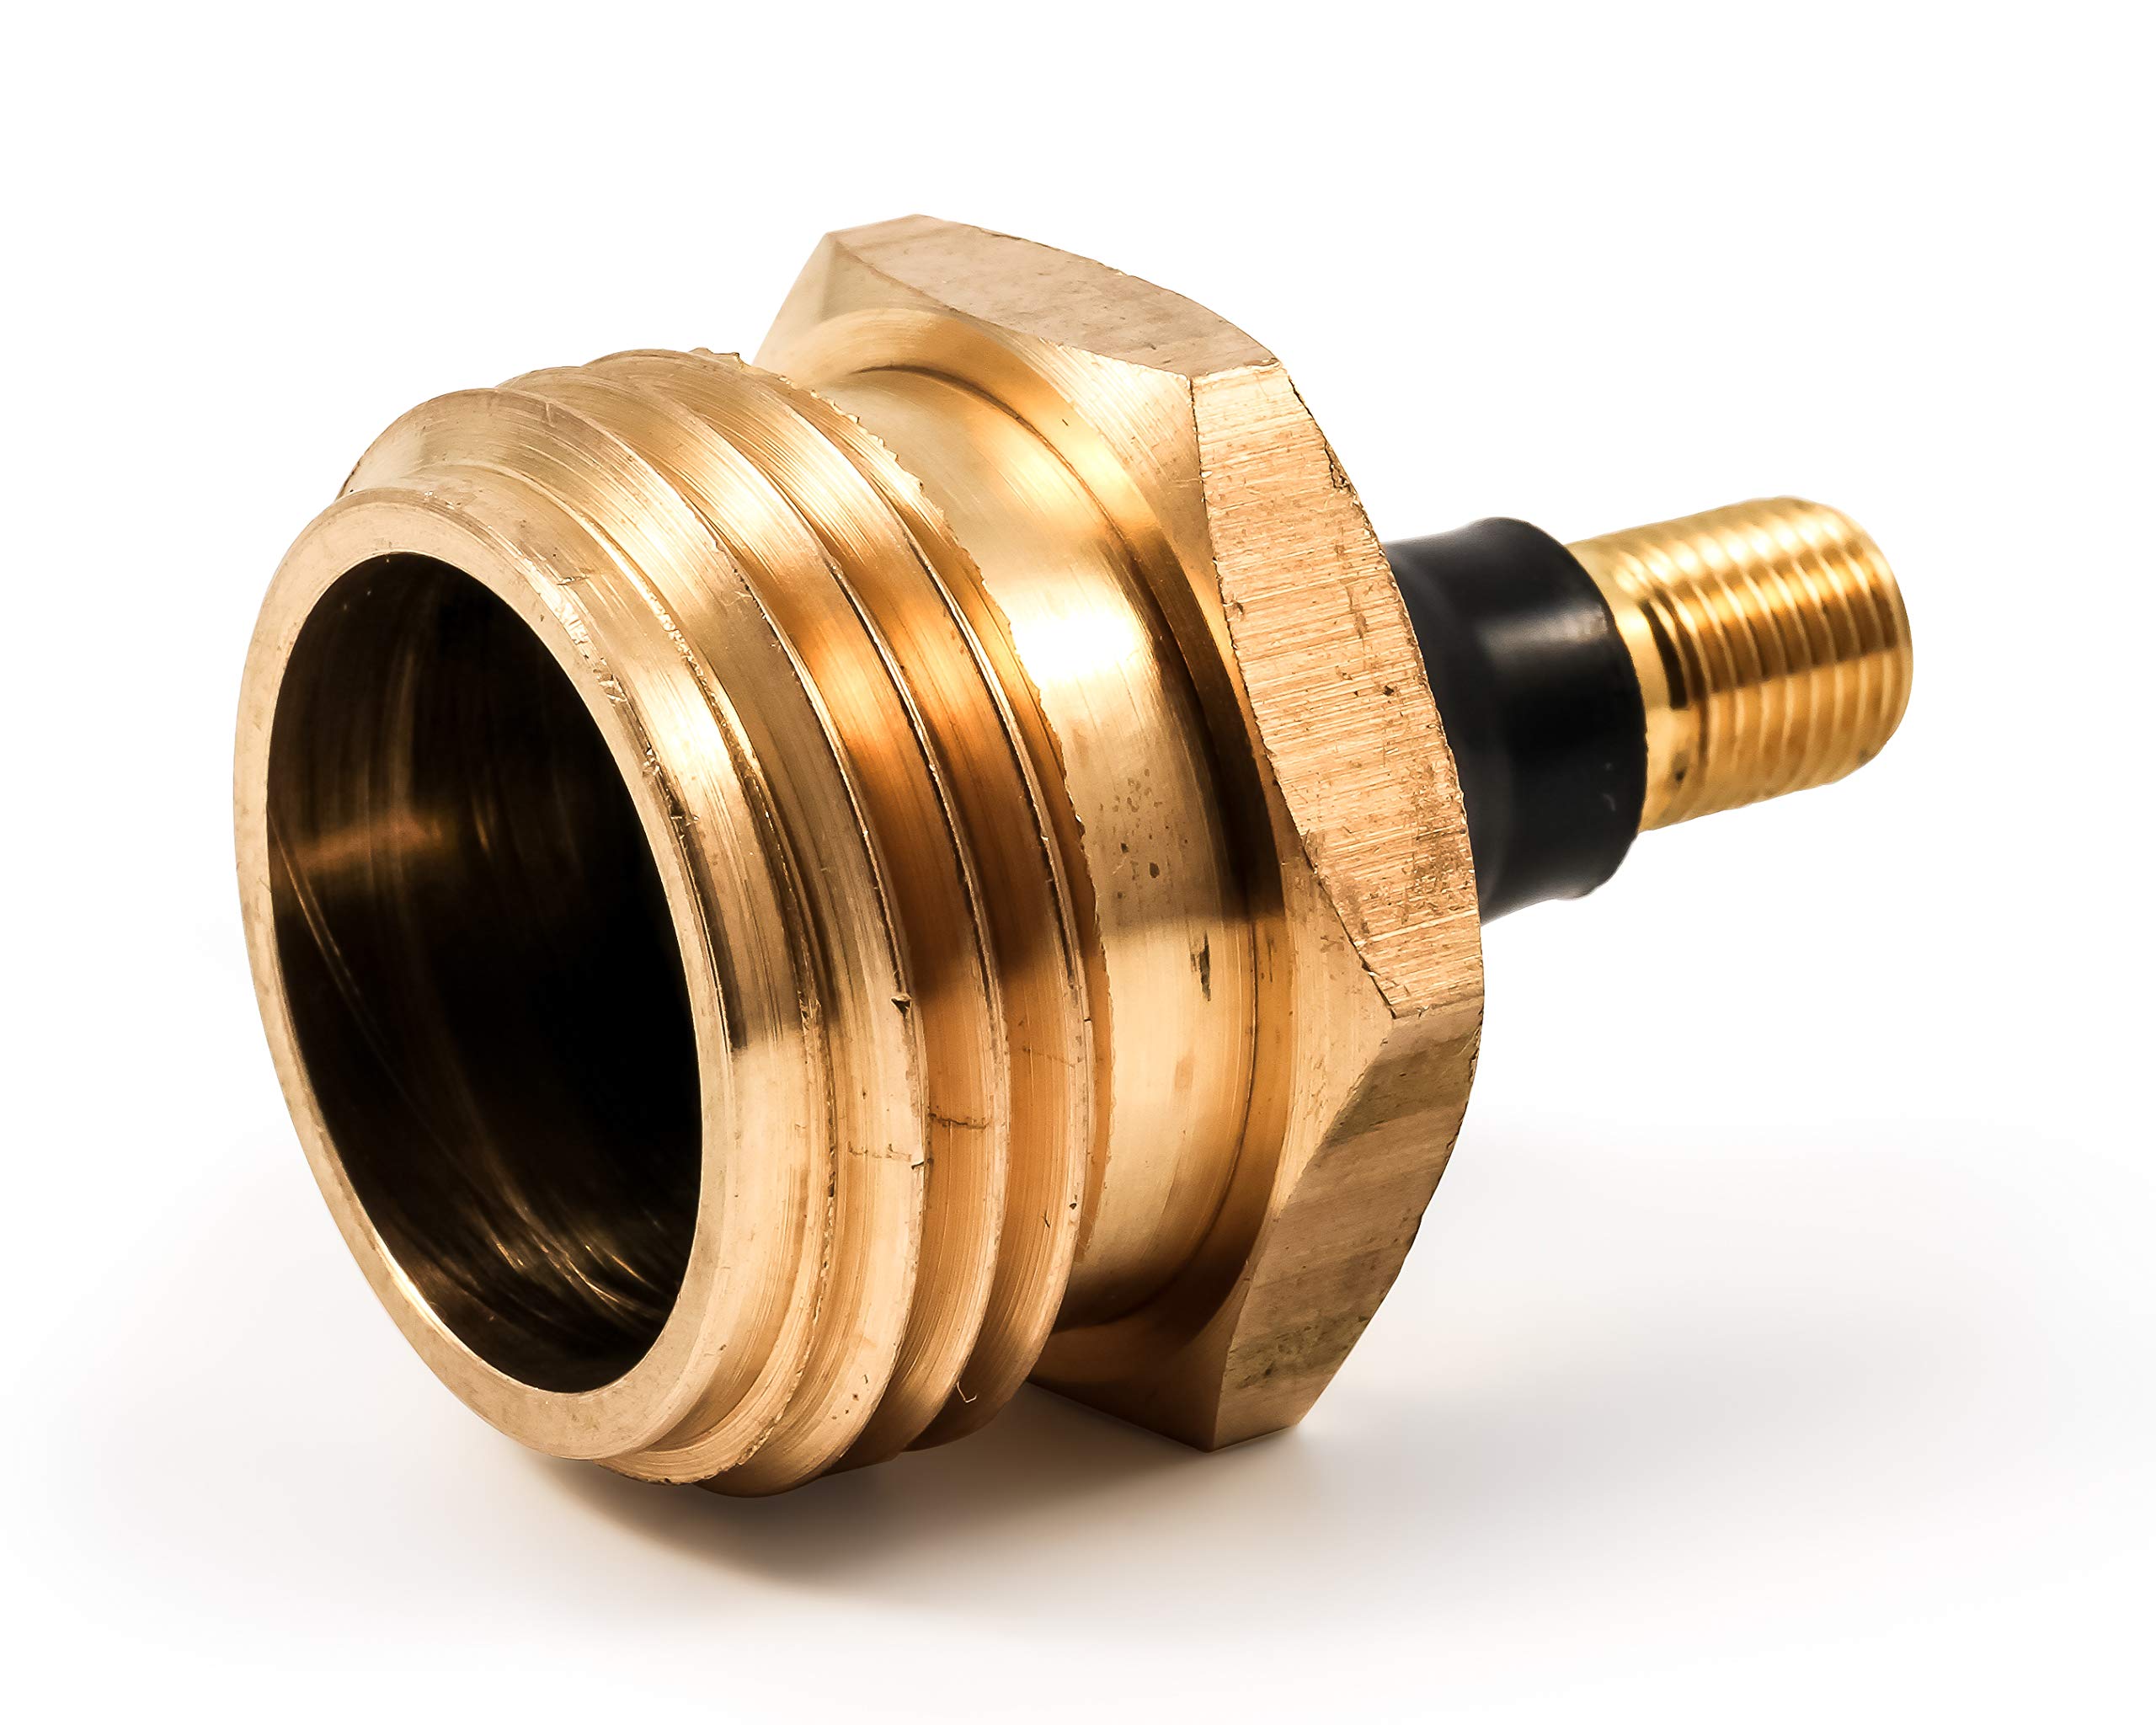 Camco RV Brass Blow Out Plug | Helps Clear Your RV's Water Lines During Winterization and Dewinterization (36153)